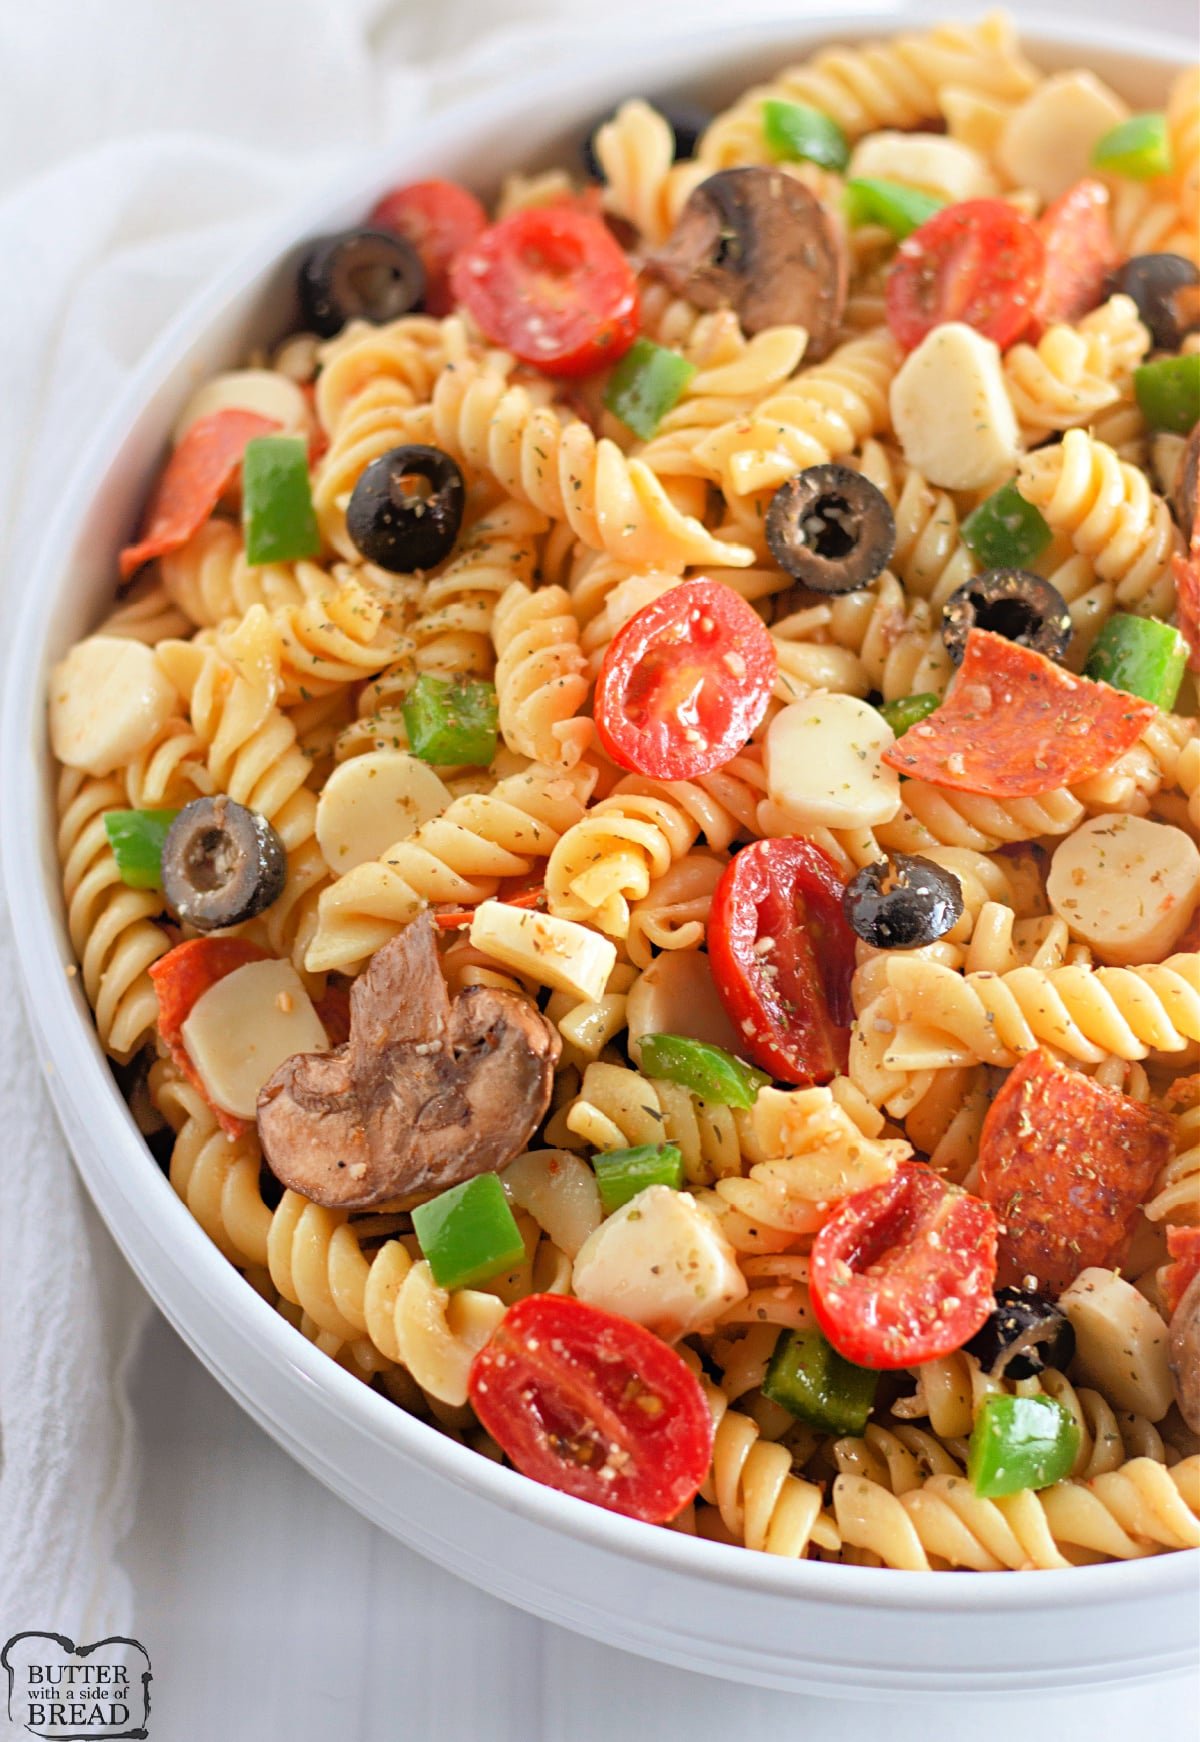 Pasta salad made with Italian dressing and pizza toppings